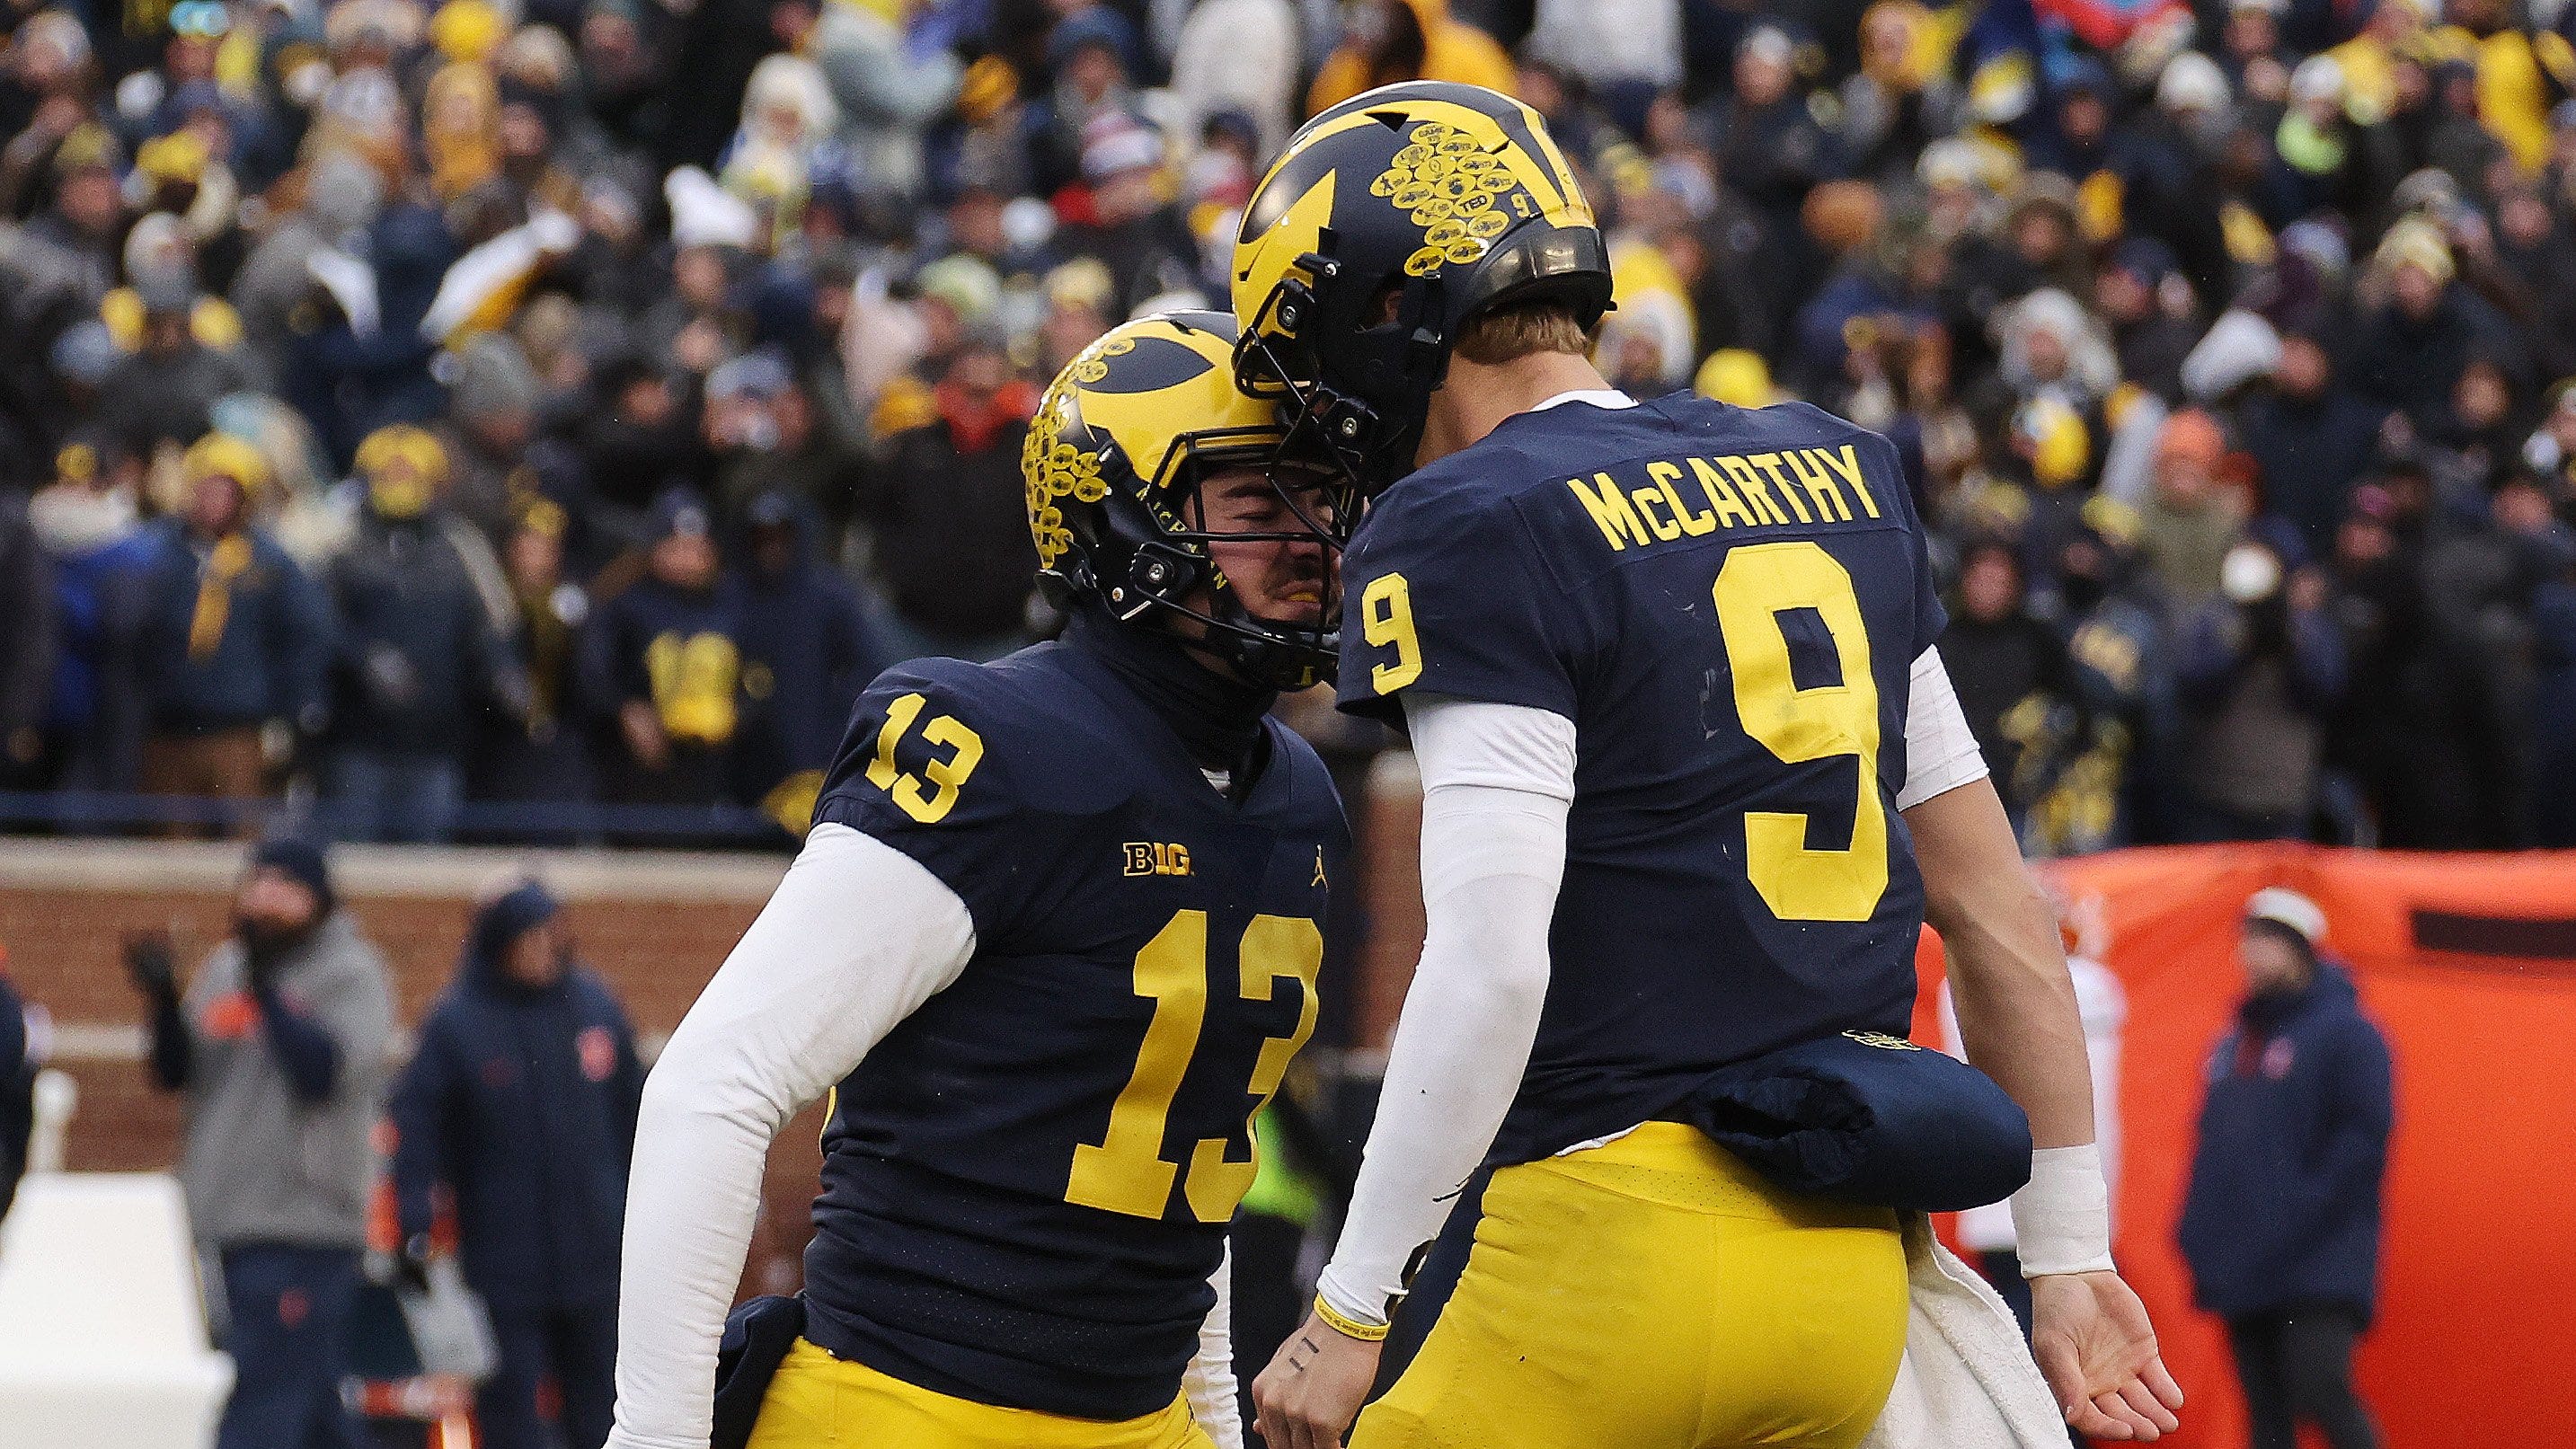 Michigan football vs. Ohio State Wolverines ninepoint underdogs